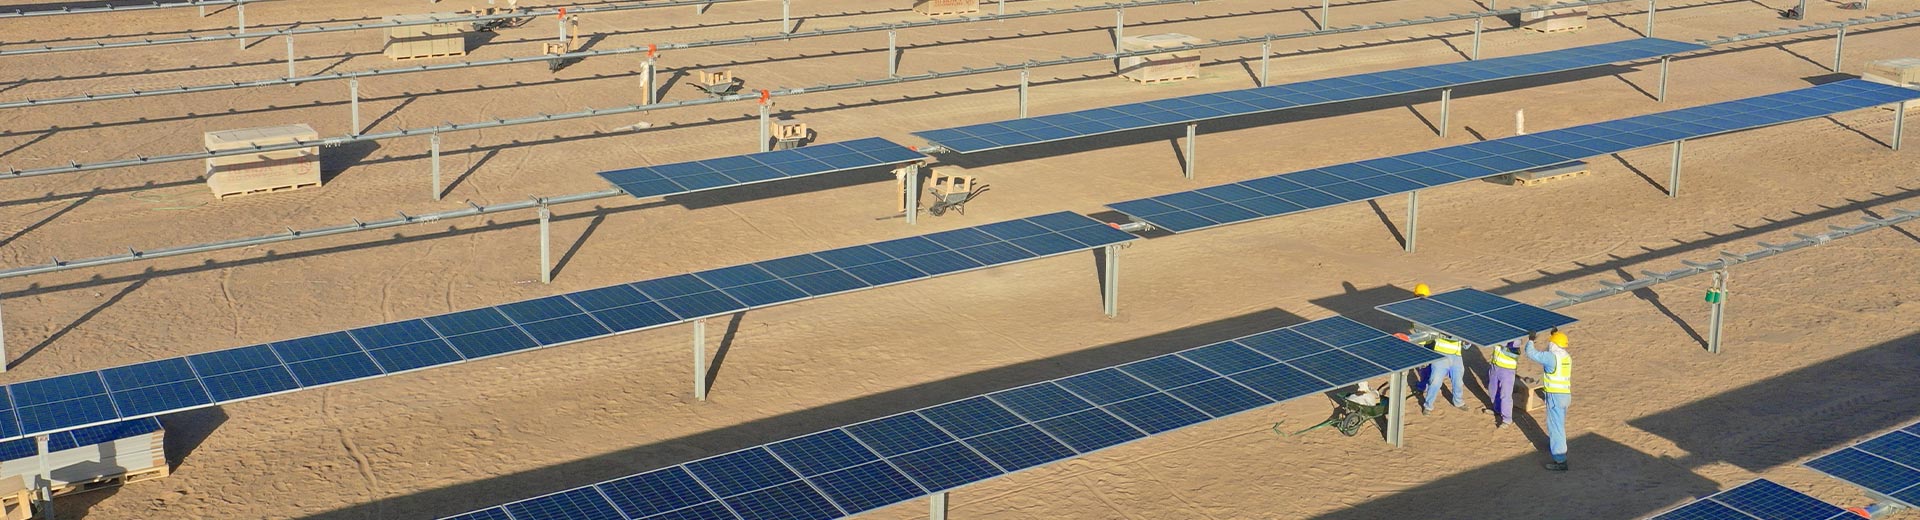 Oman: Project Harnesses the Power of the Sun and Investors